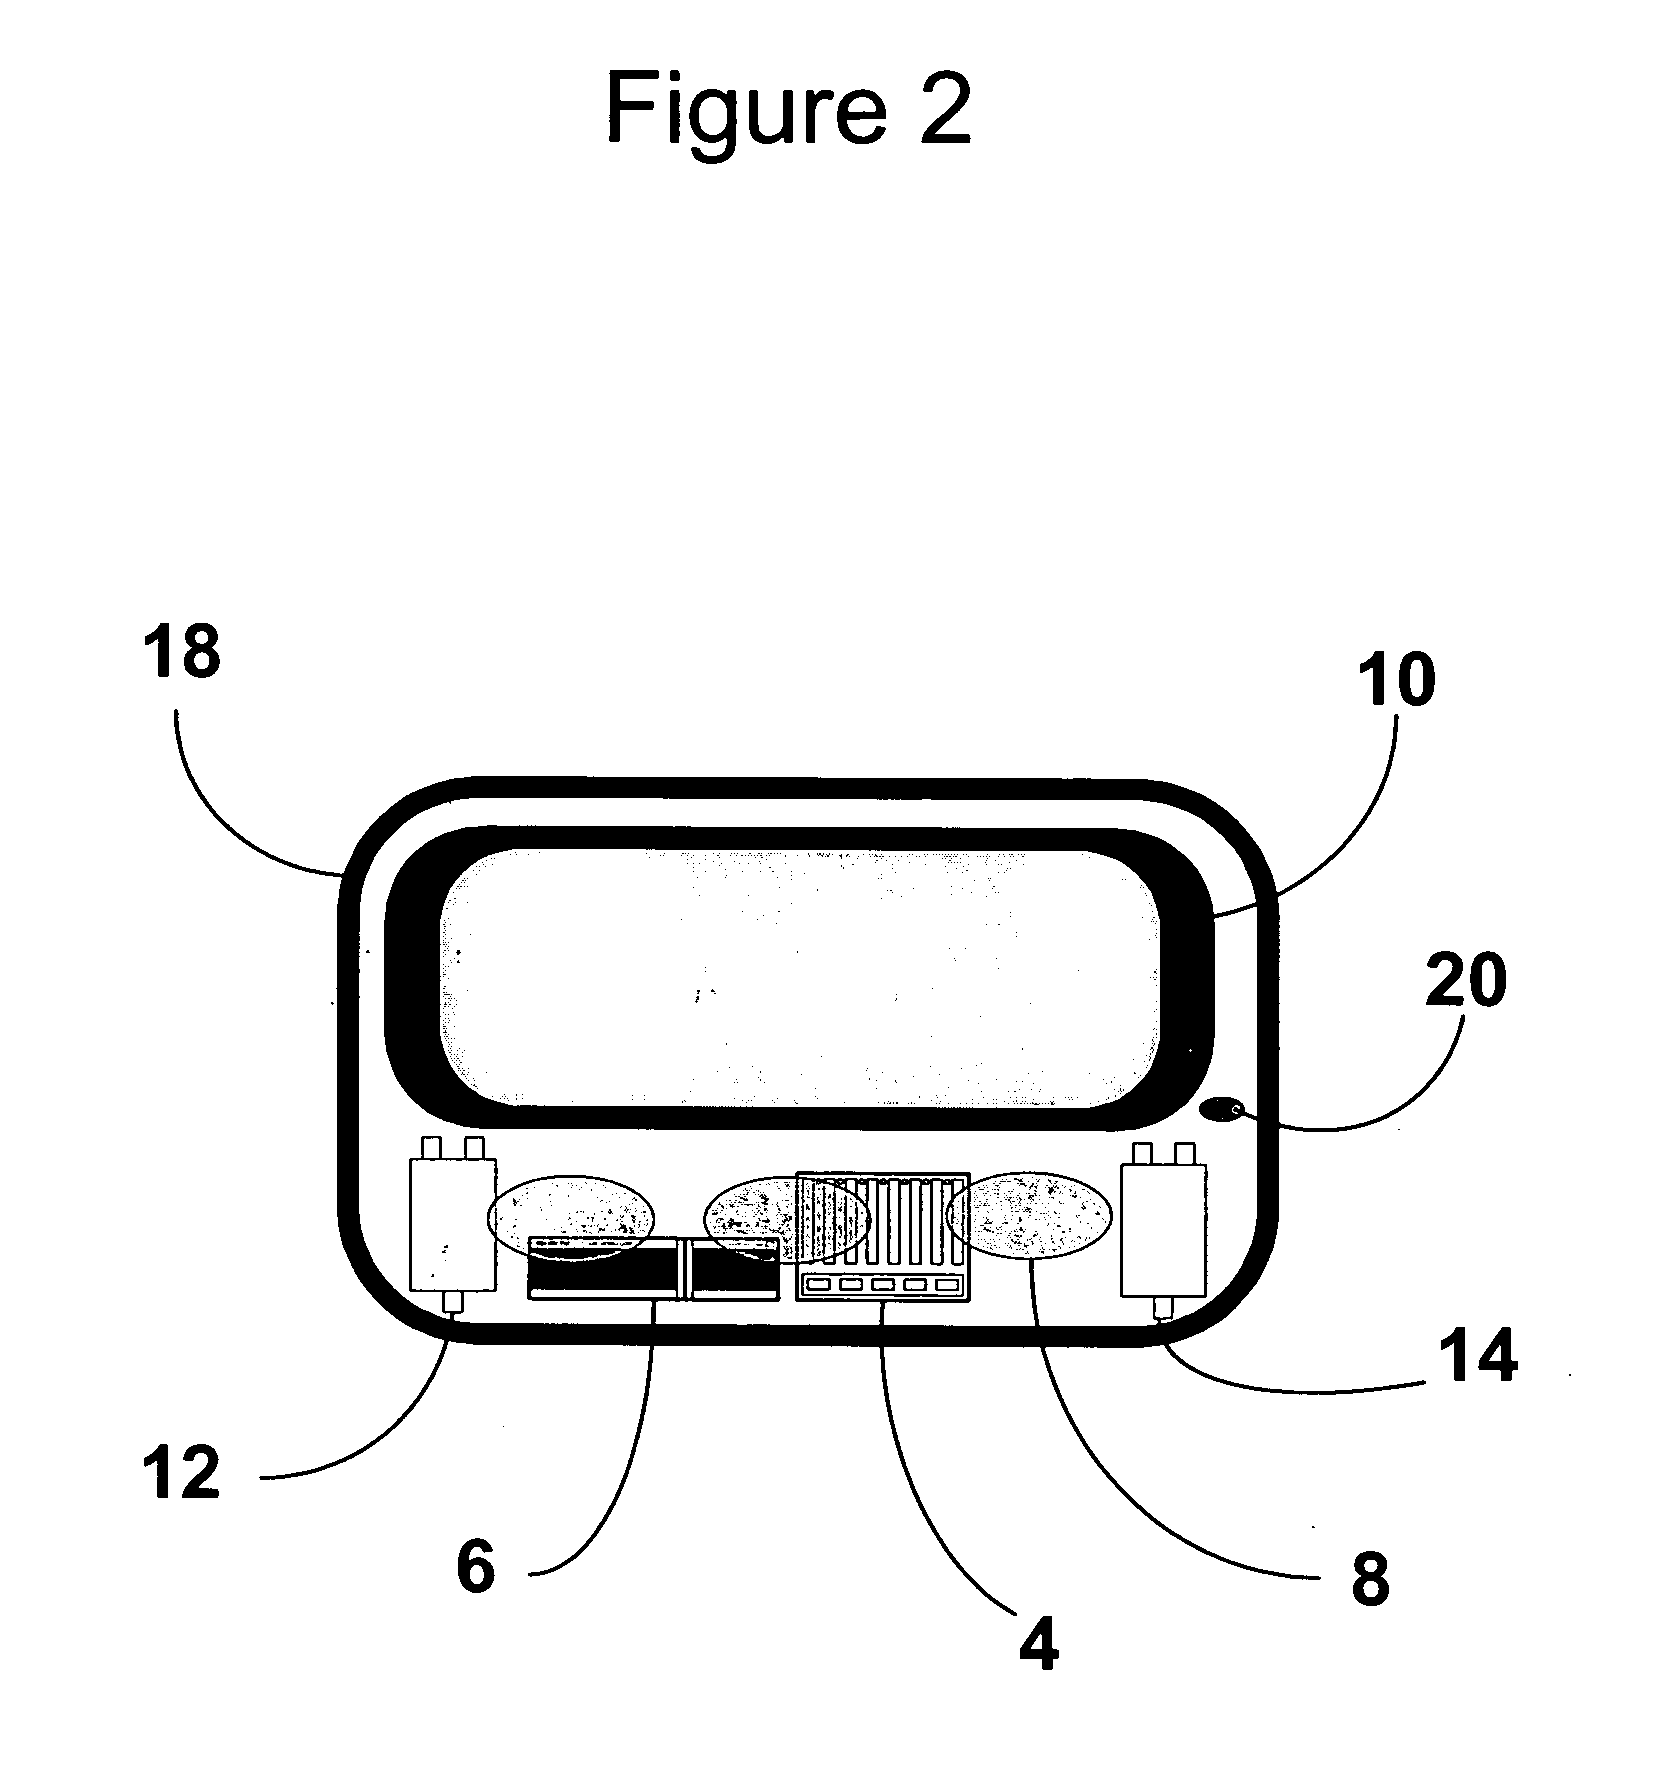 Method and system for identifying, matching and transacting information among portable devices within radio frequency proximity